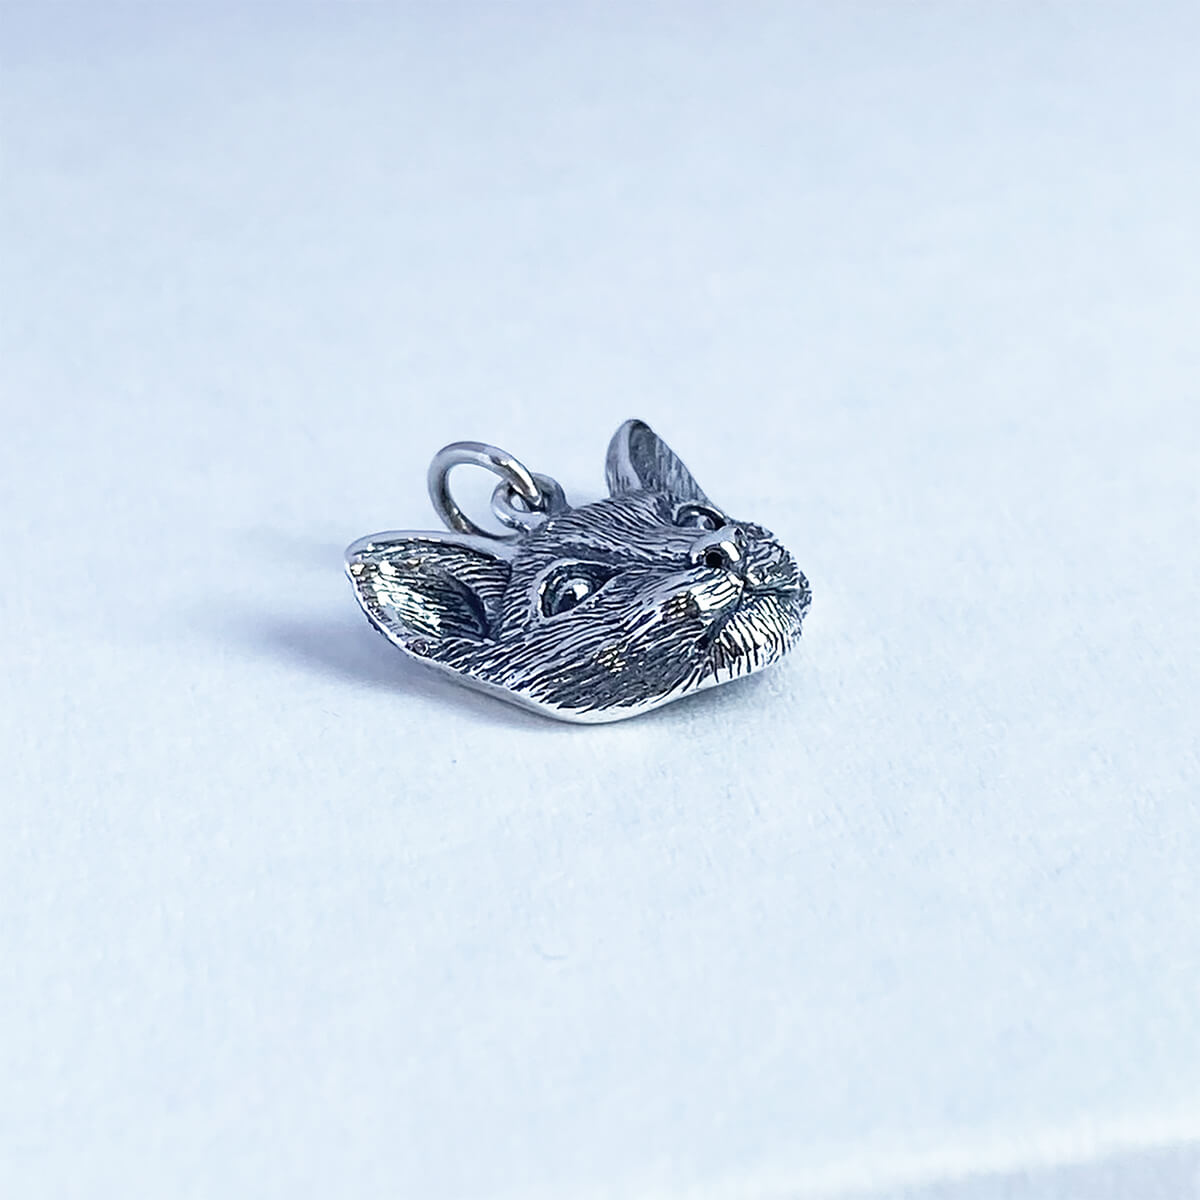 Realistic sterling silver cat's head charm from Charmarama